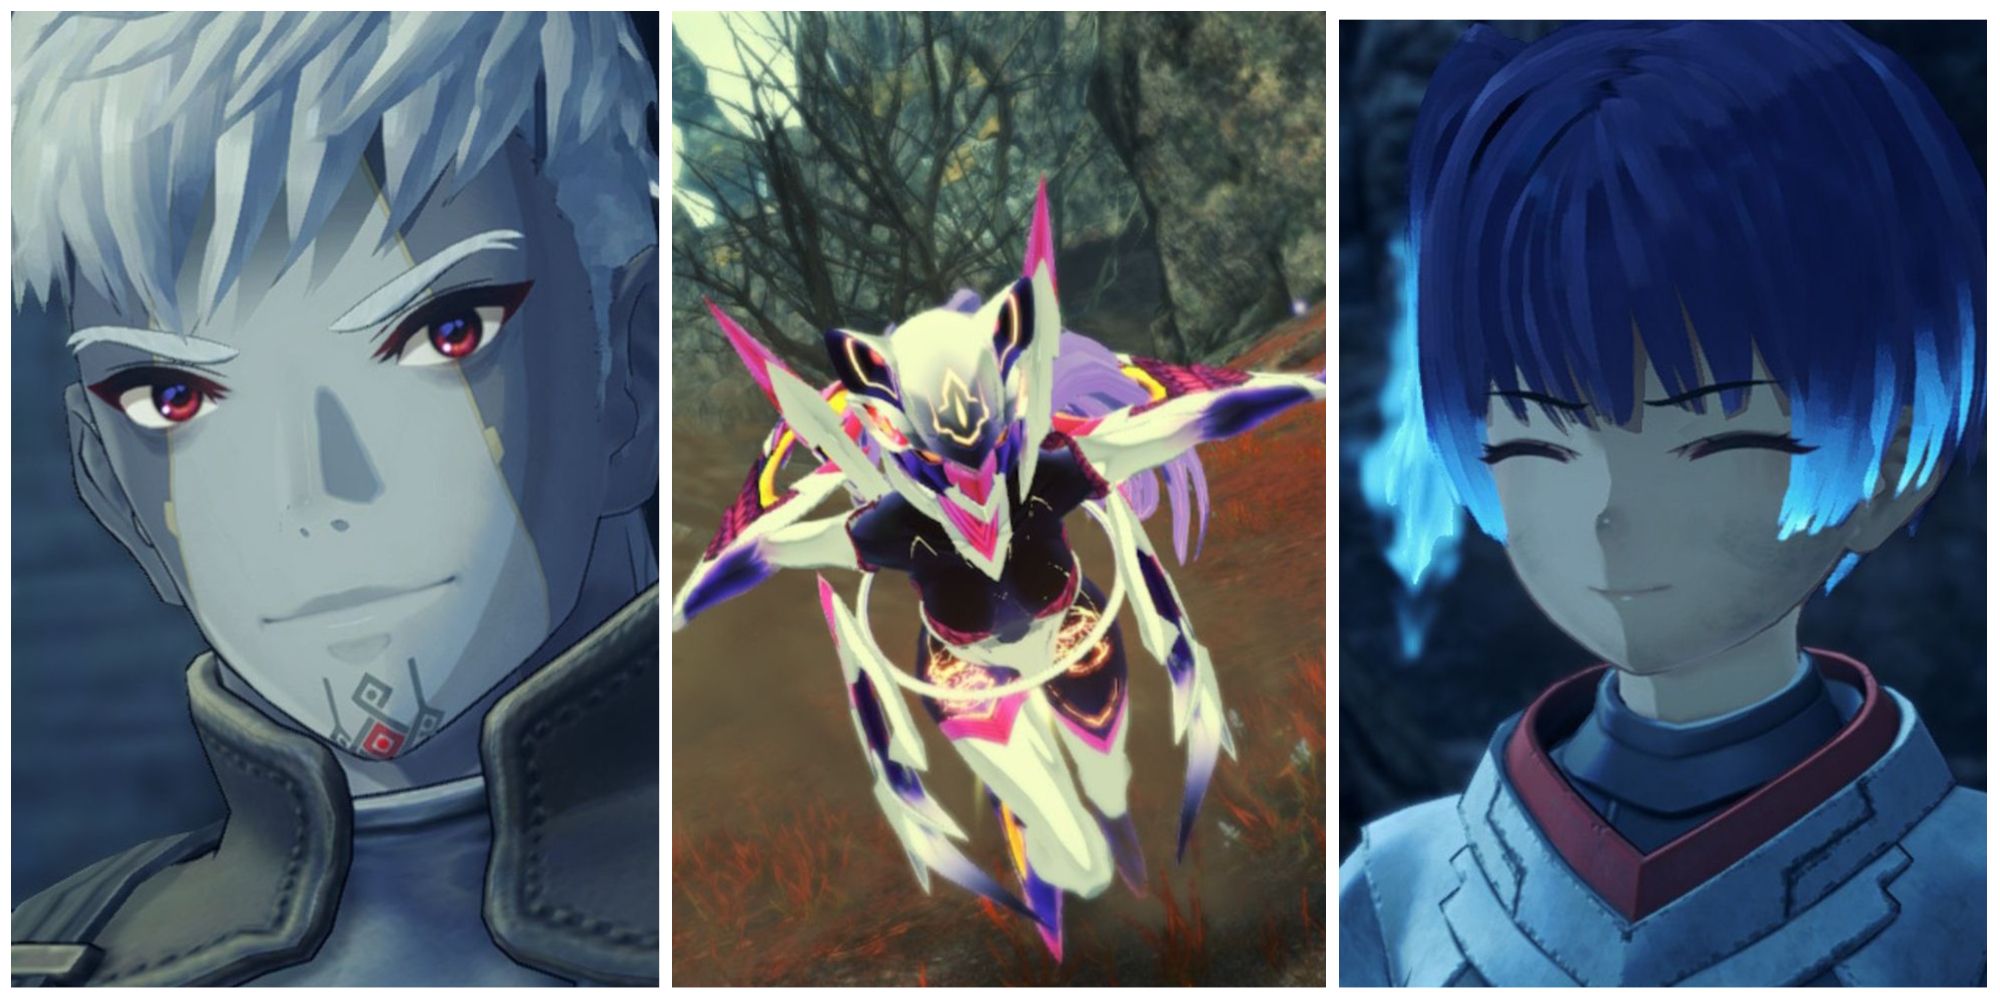 on the left is Lanz from Xenoblade Chronicles 3, in the middle is Mia's Ouroboros form and on the right is Sena